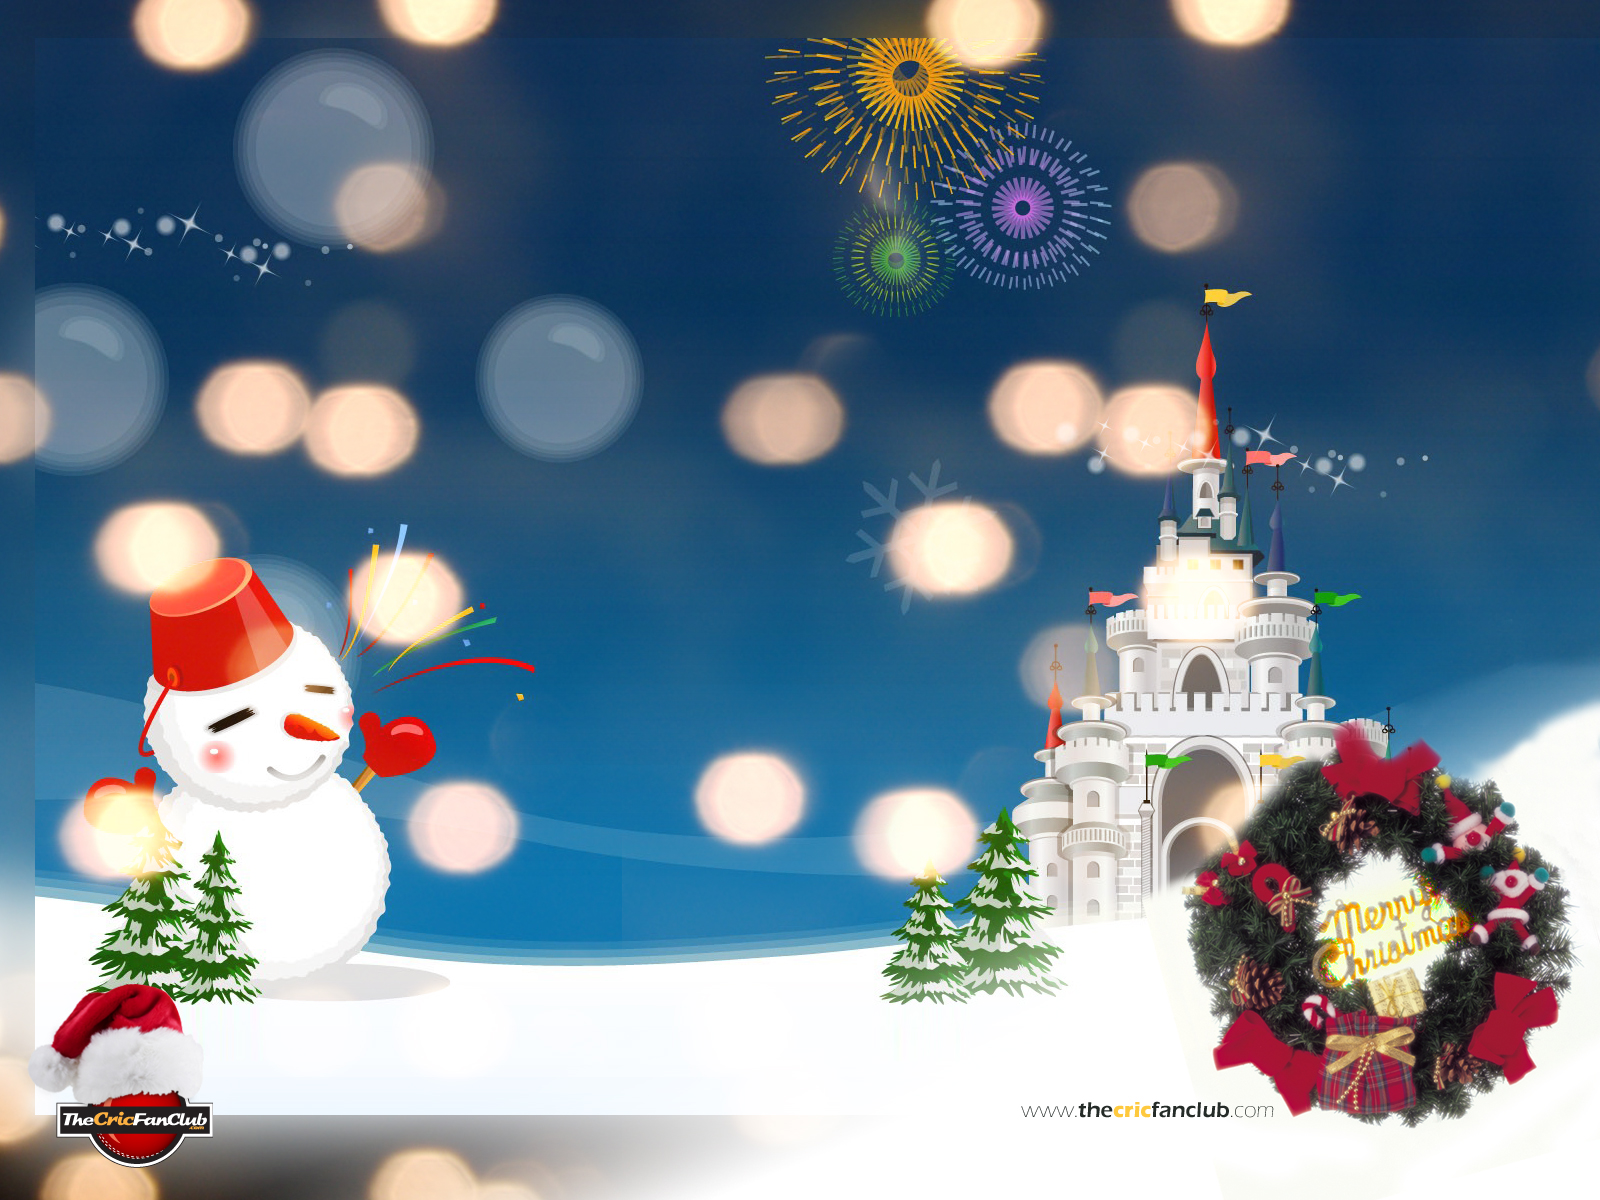 Download full size Merry Christmas wallpaper / People / 1600x1200